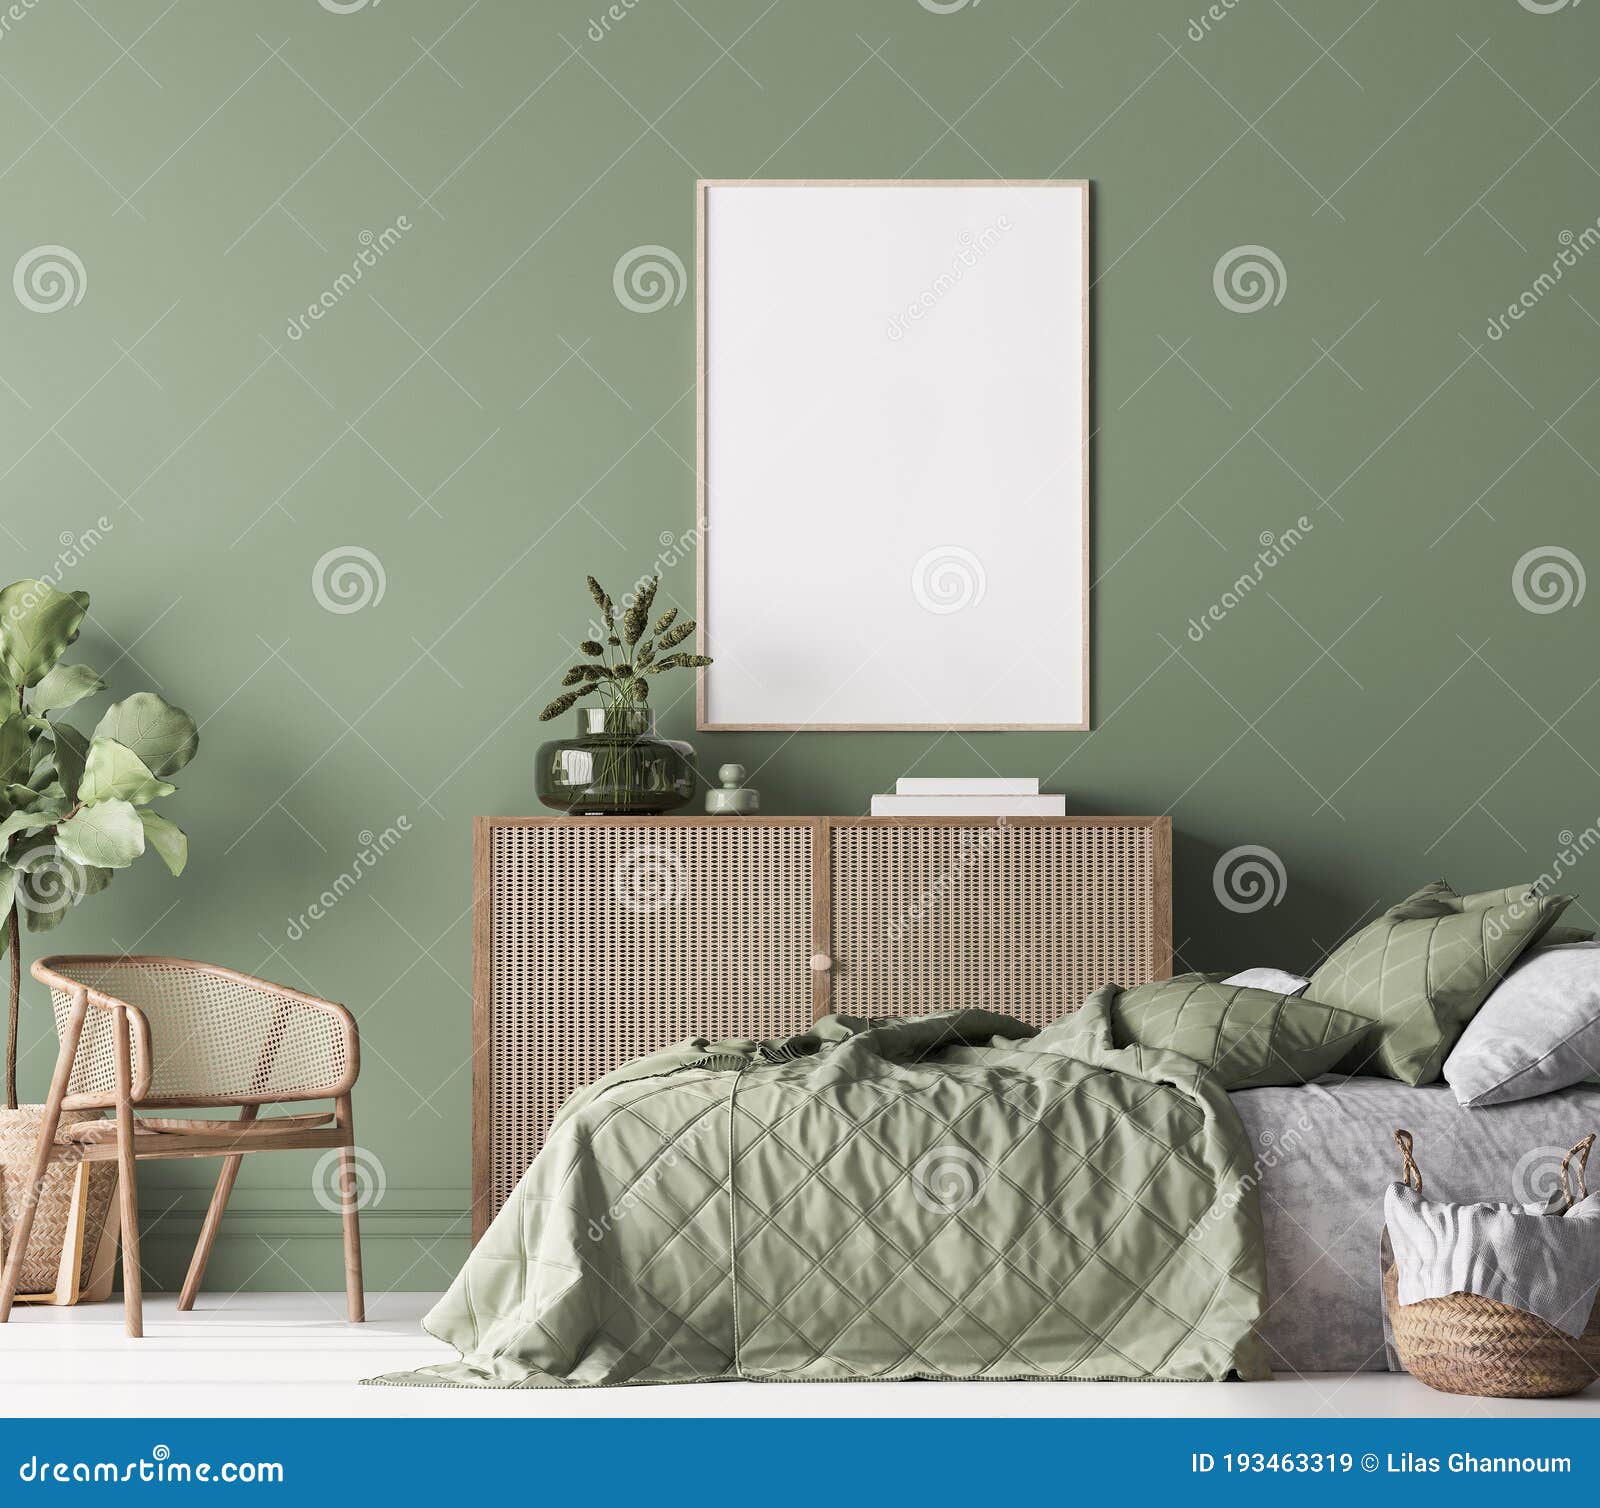 poster frame mockup in farmhouse bedroom, green room interior  with natural wooden furniture